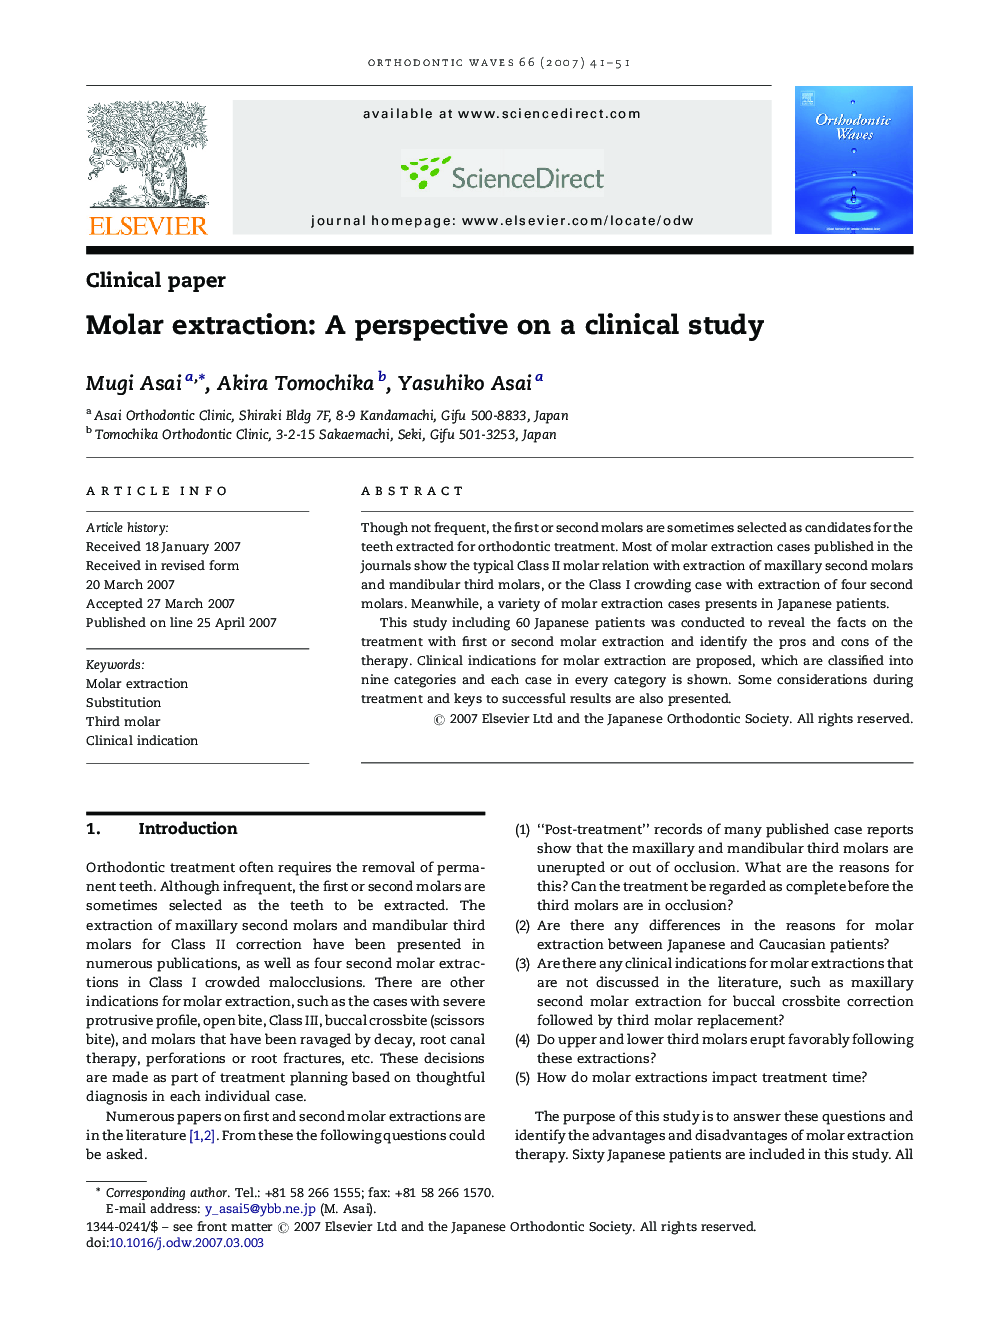 Molar extraction: A perspective on a clinical study